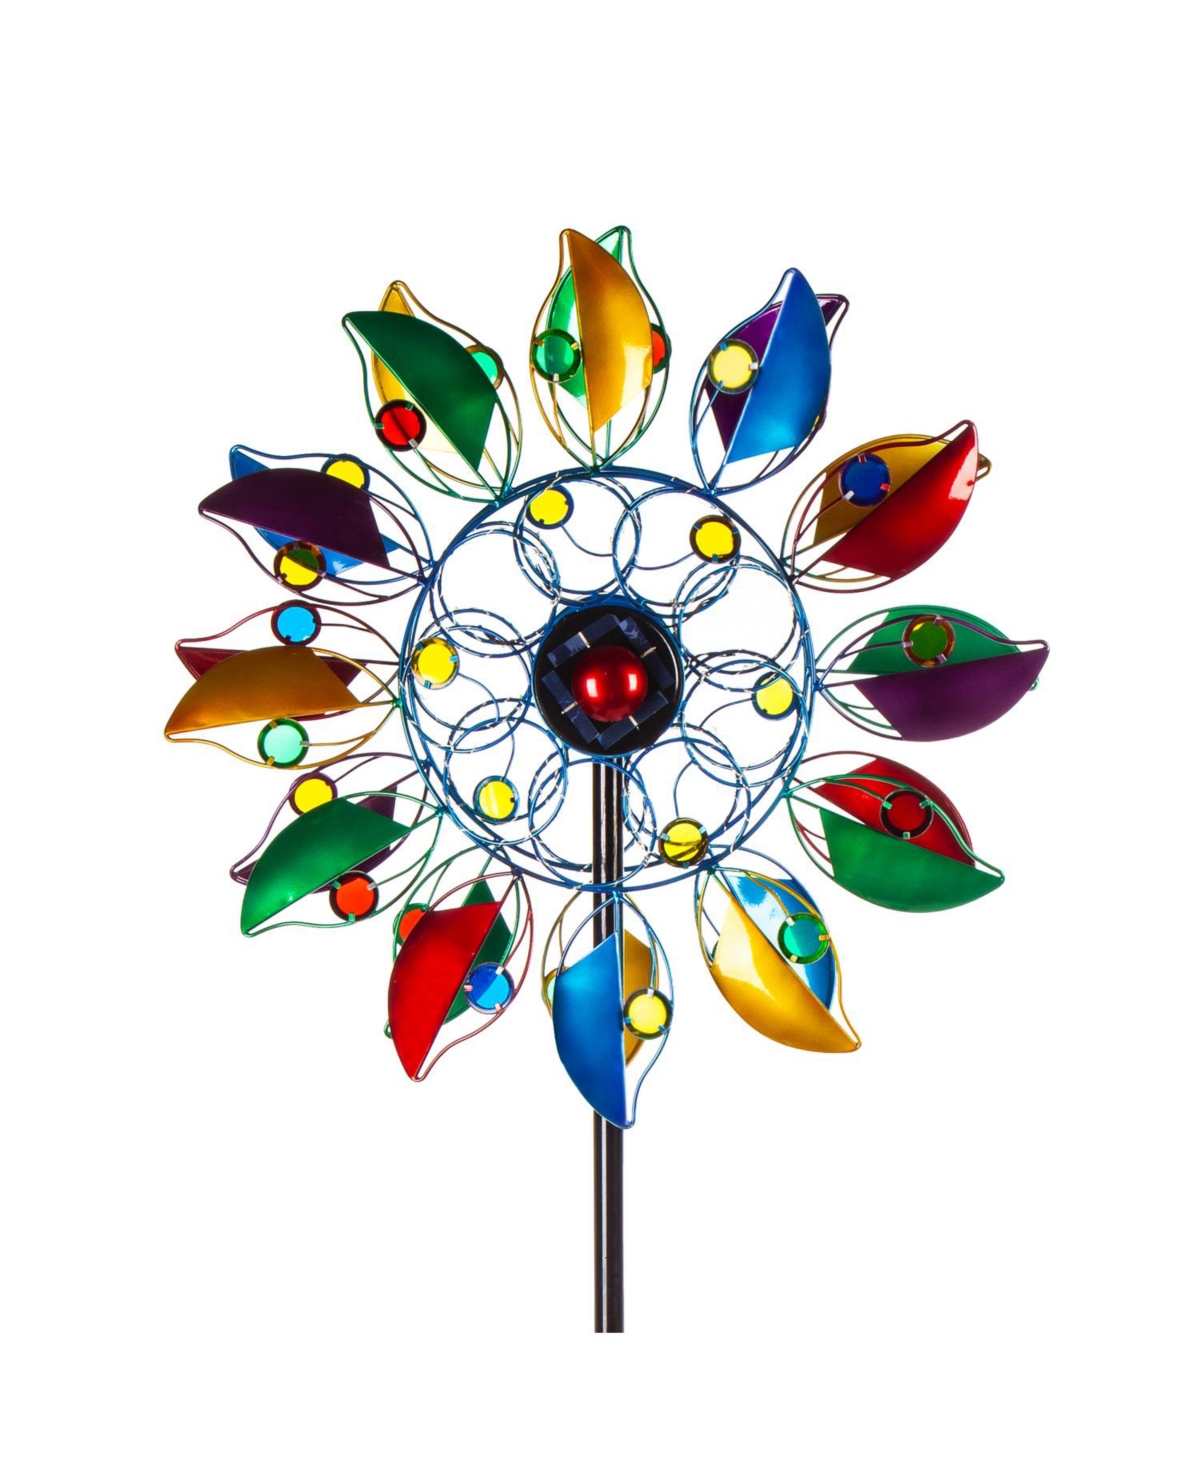 Evergreen 75"h Solar Wind Spinner, Radiant Jewel- Fade And Weather Resistant Outdoor Decor In Multicolored